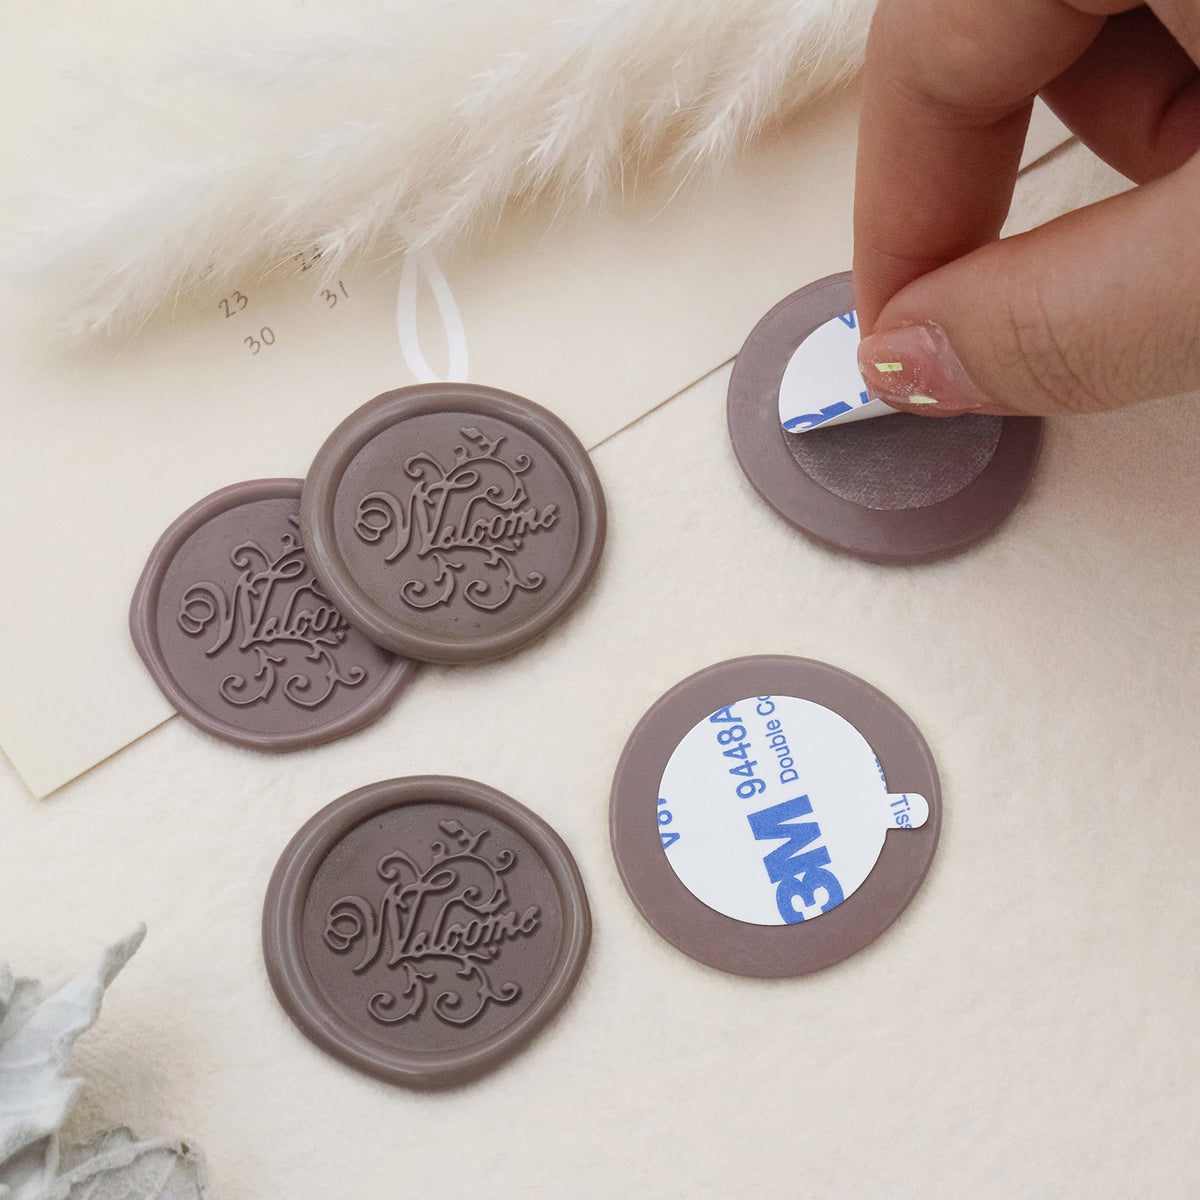 Stamprints Greeting Self-adhesive Wax Seal Stickers - Welcome 2